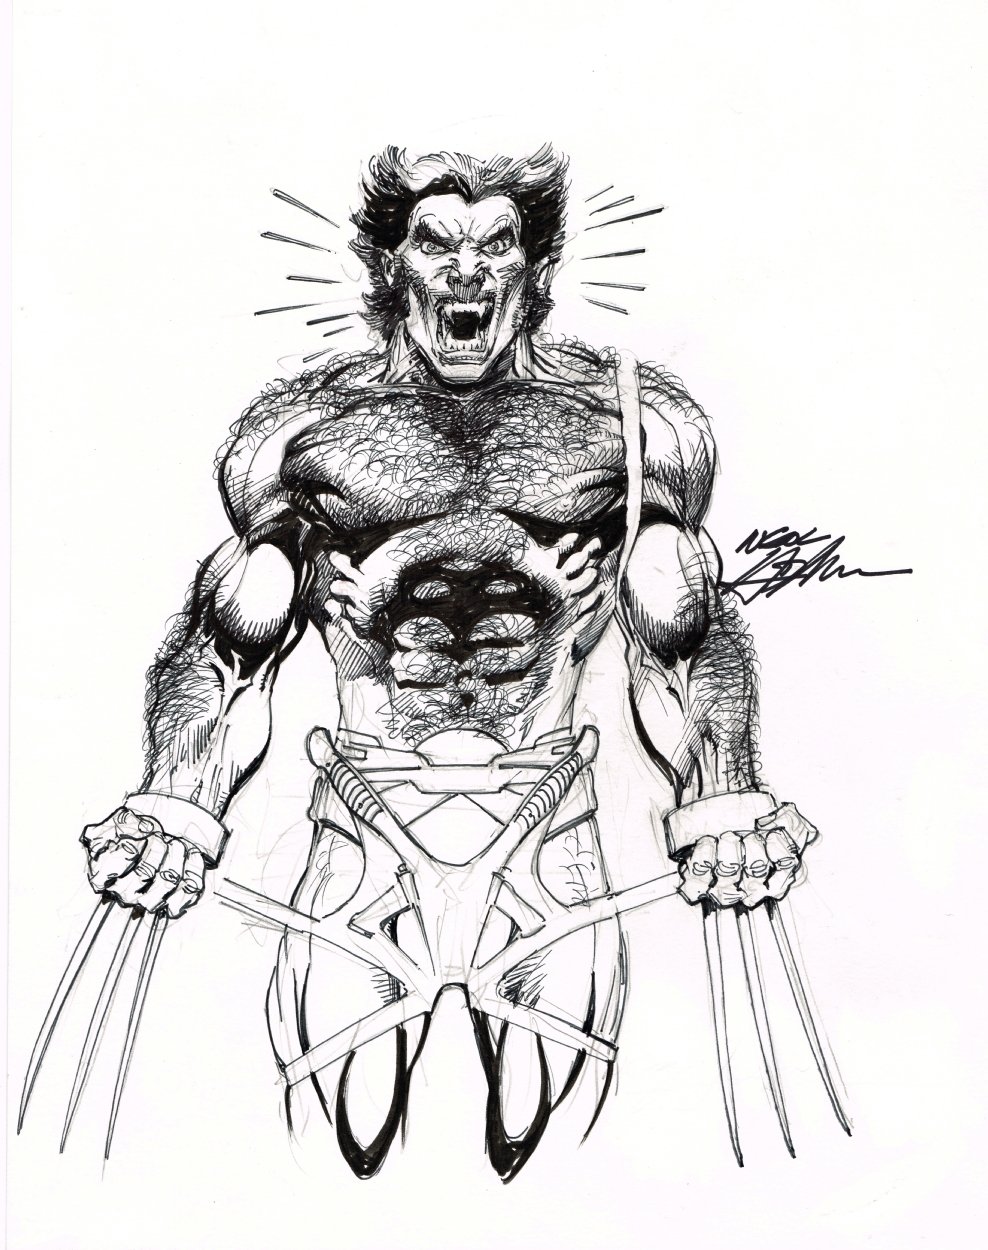 Wolverine Cover Concept - Neal Adams, in J B's The Belmont Gallery ...